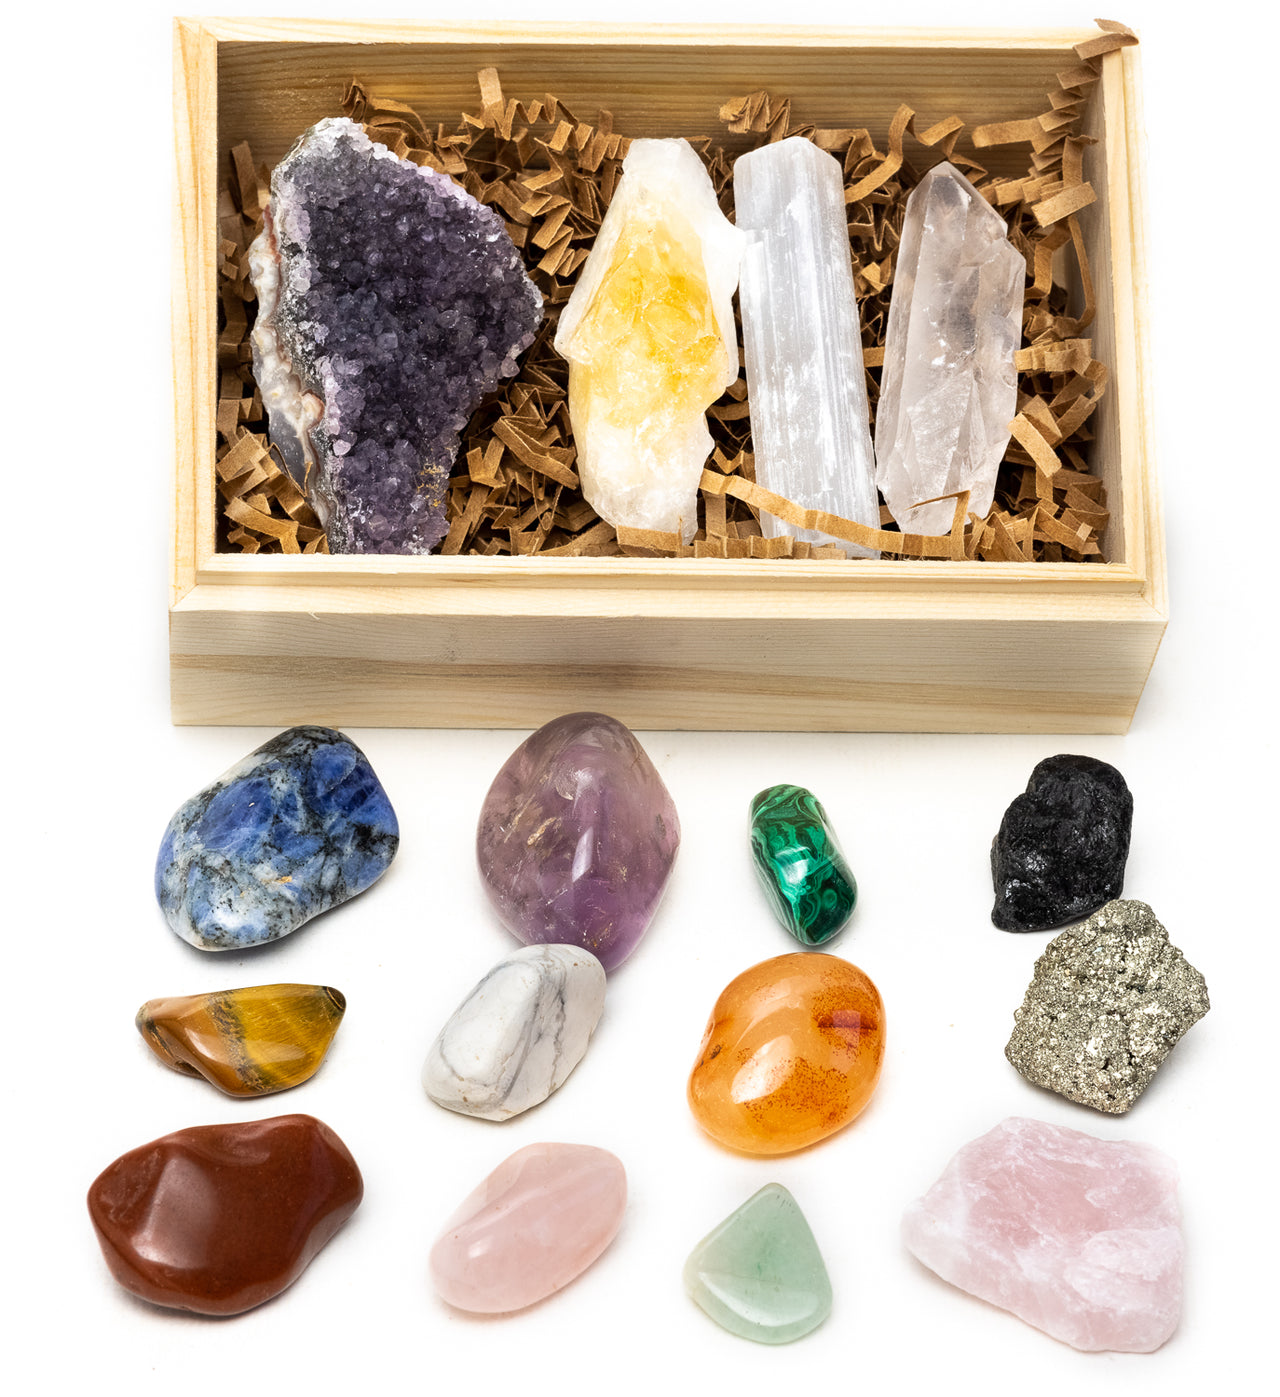 Crystals For Your Home Starter Kit - 16 pieces